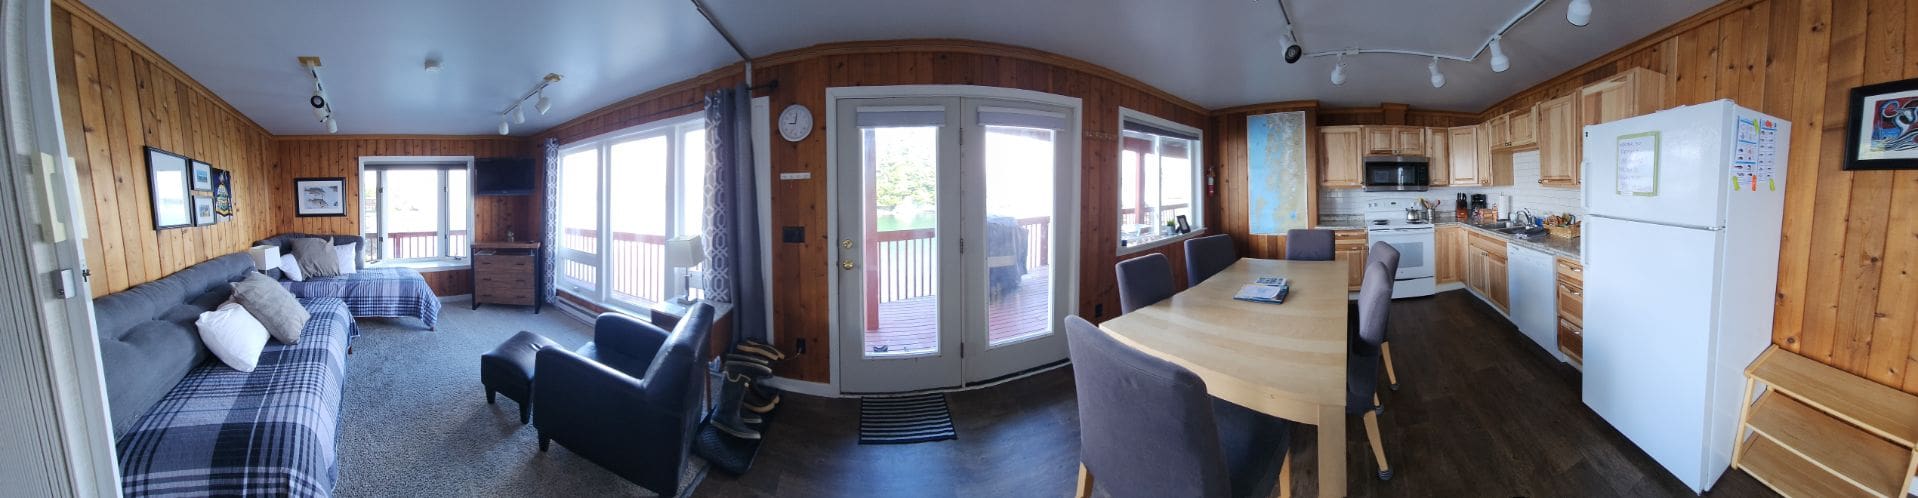 Living room and kitchen of waterfront suite in Sitka, Alaska